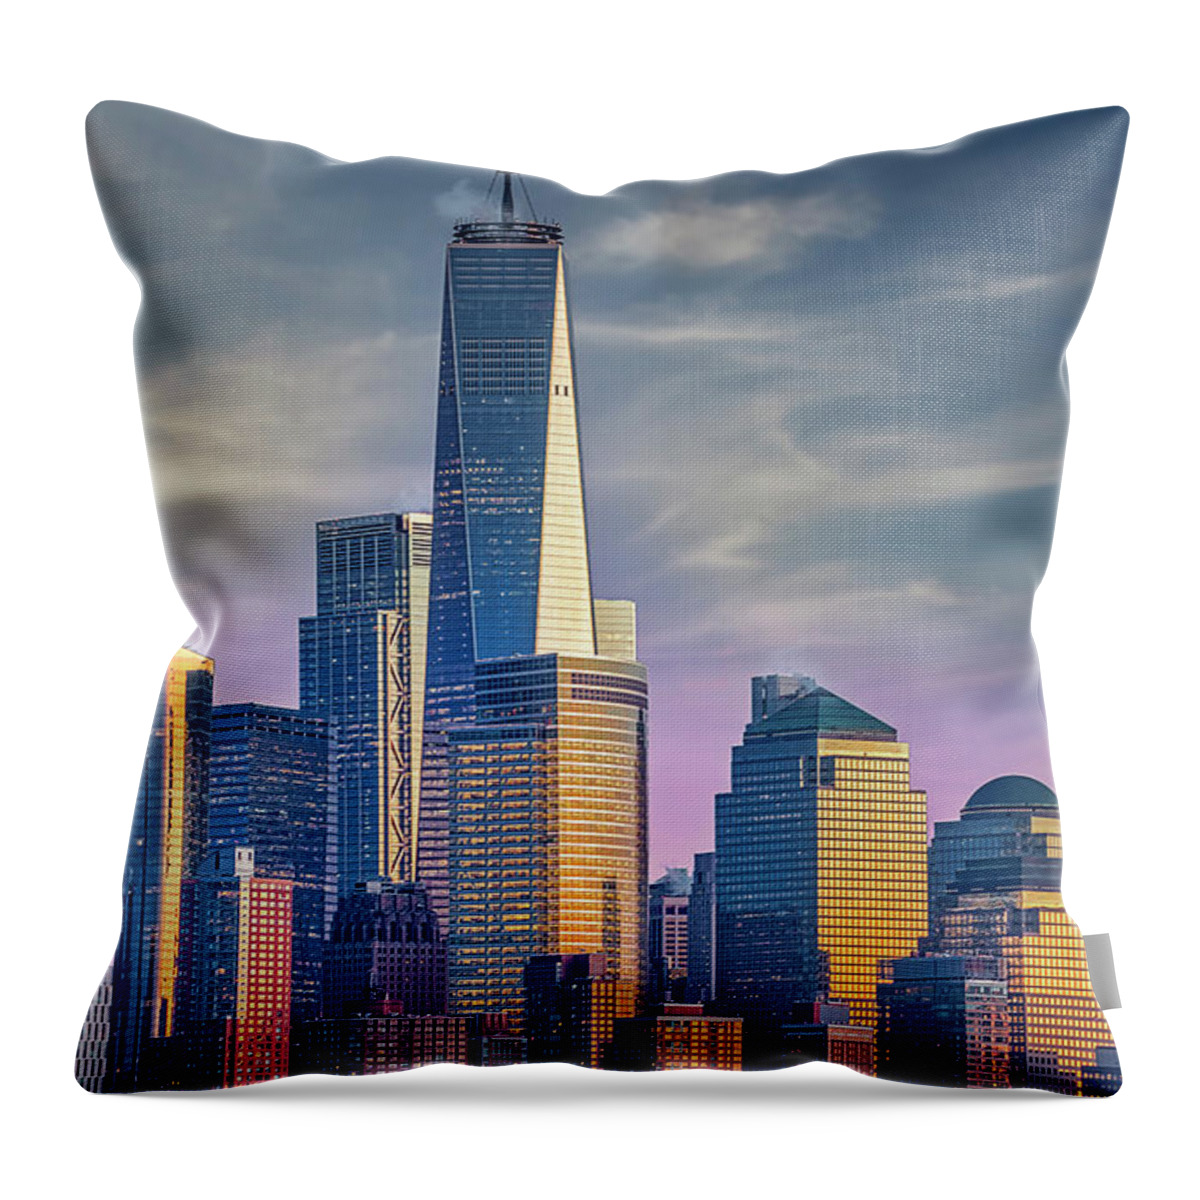 Nyc Skyline Throw Pillow featuring the photograph World Trade Center NYC by Susan Candelario